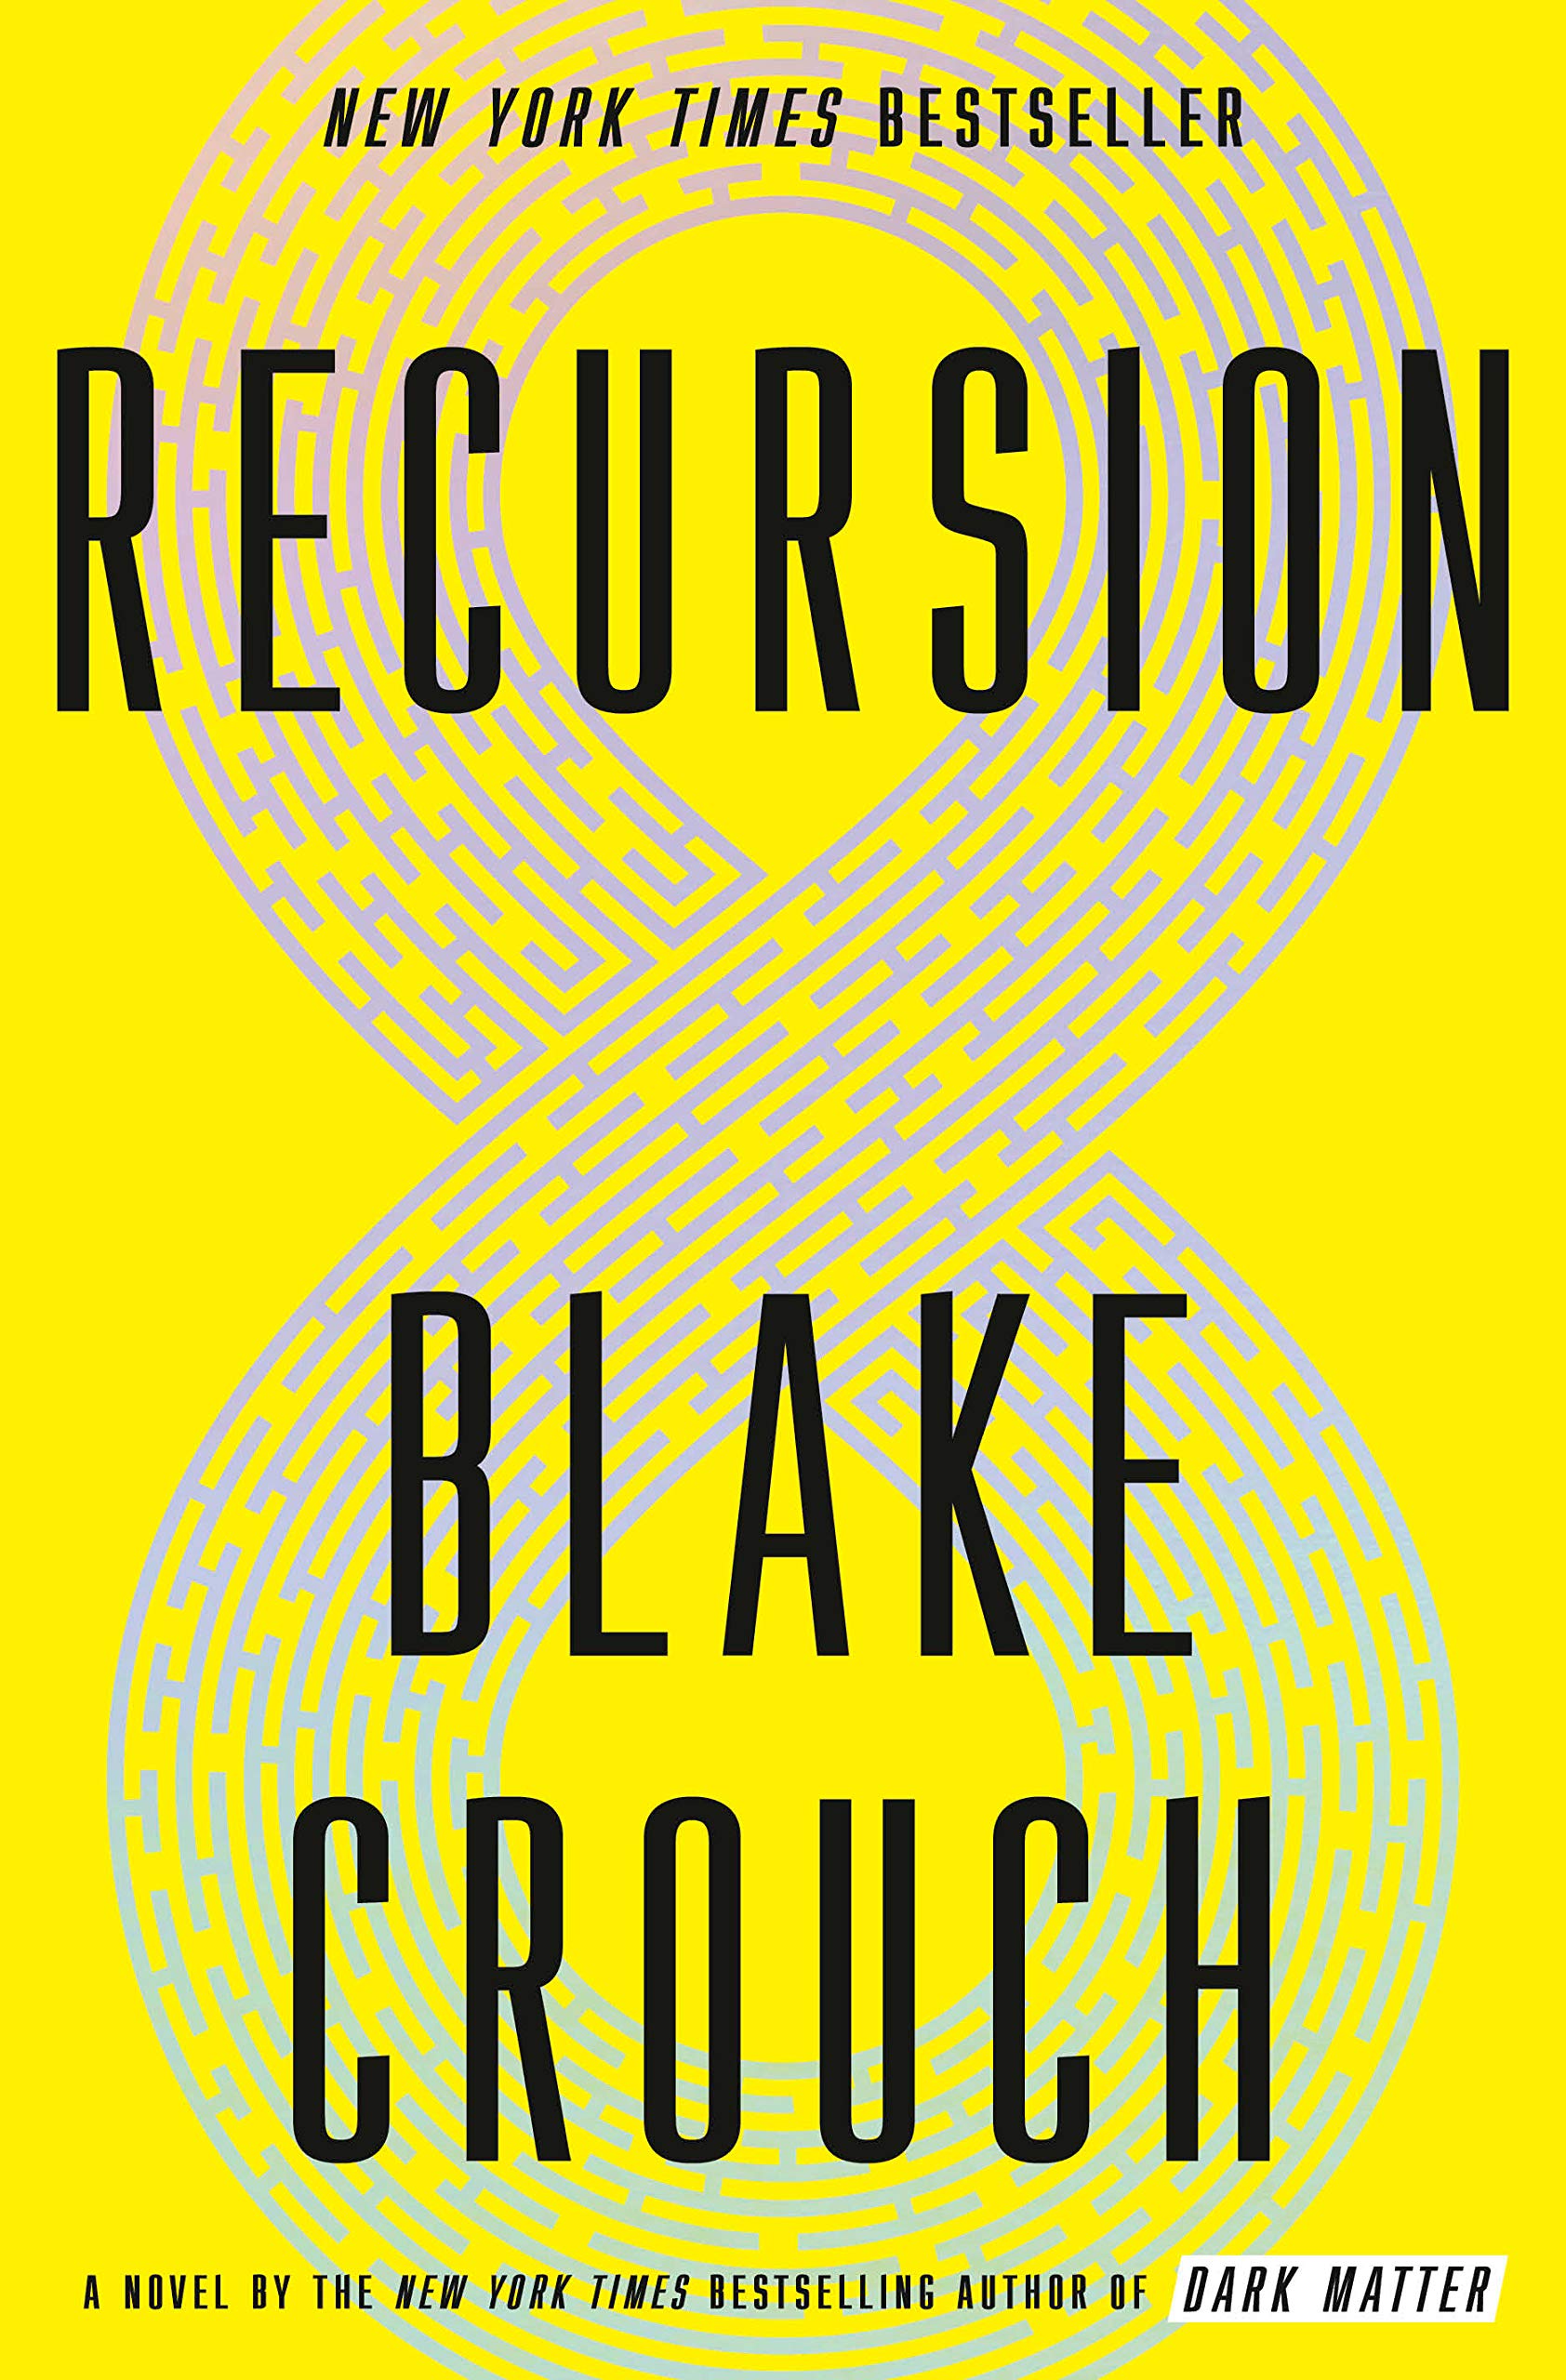 Image of book cover for Recursion by Blake Crouch